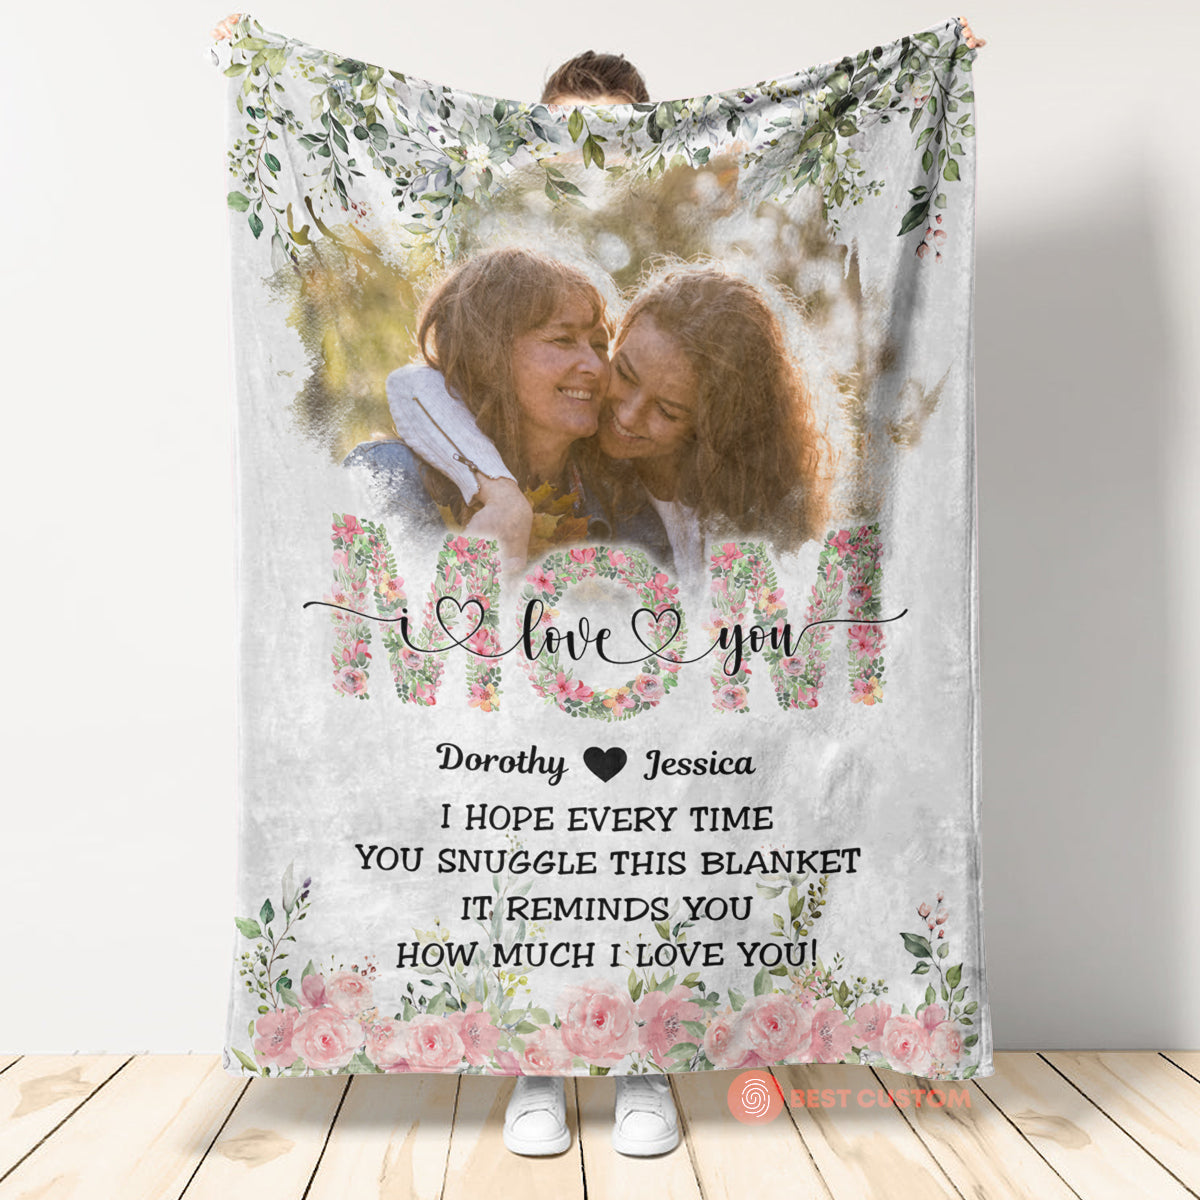 Snuggle This Blanket - It Reminds How Much We Love You - Personalized Blanket - Birthday, Mother's Day Gift For Mom, Mother, Mama 5_68392ada-ac31-4e9a-8023-f40231a2d3f8.jpg?v=1677213024